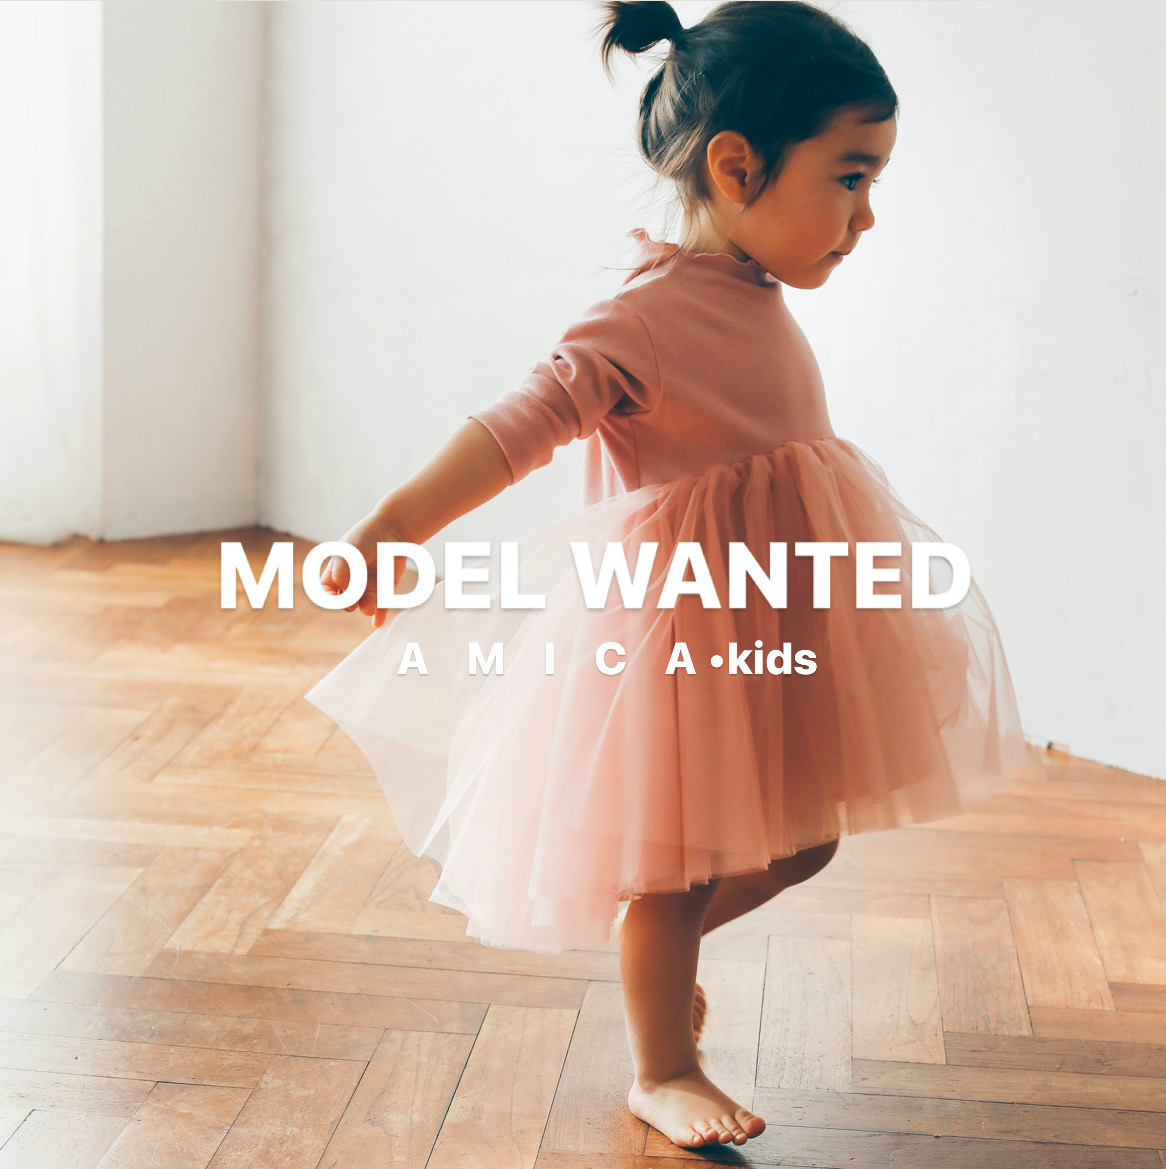 MODEL WANTED